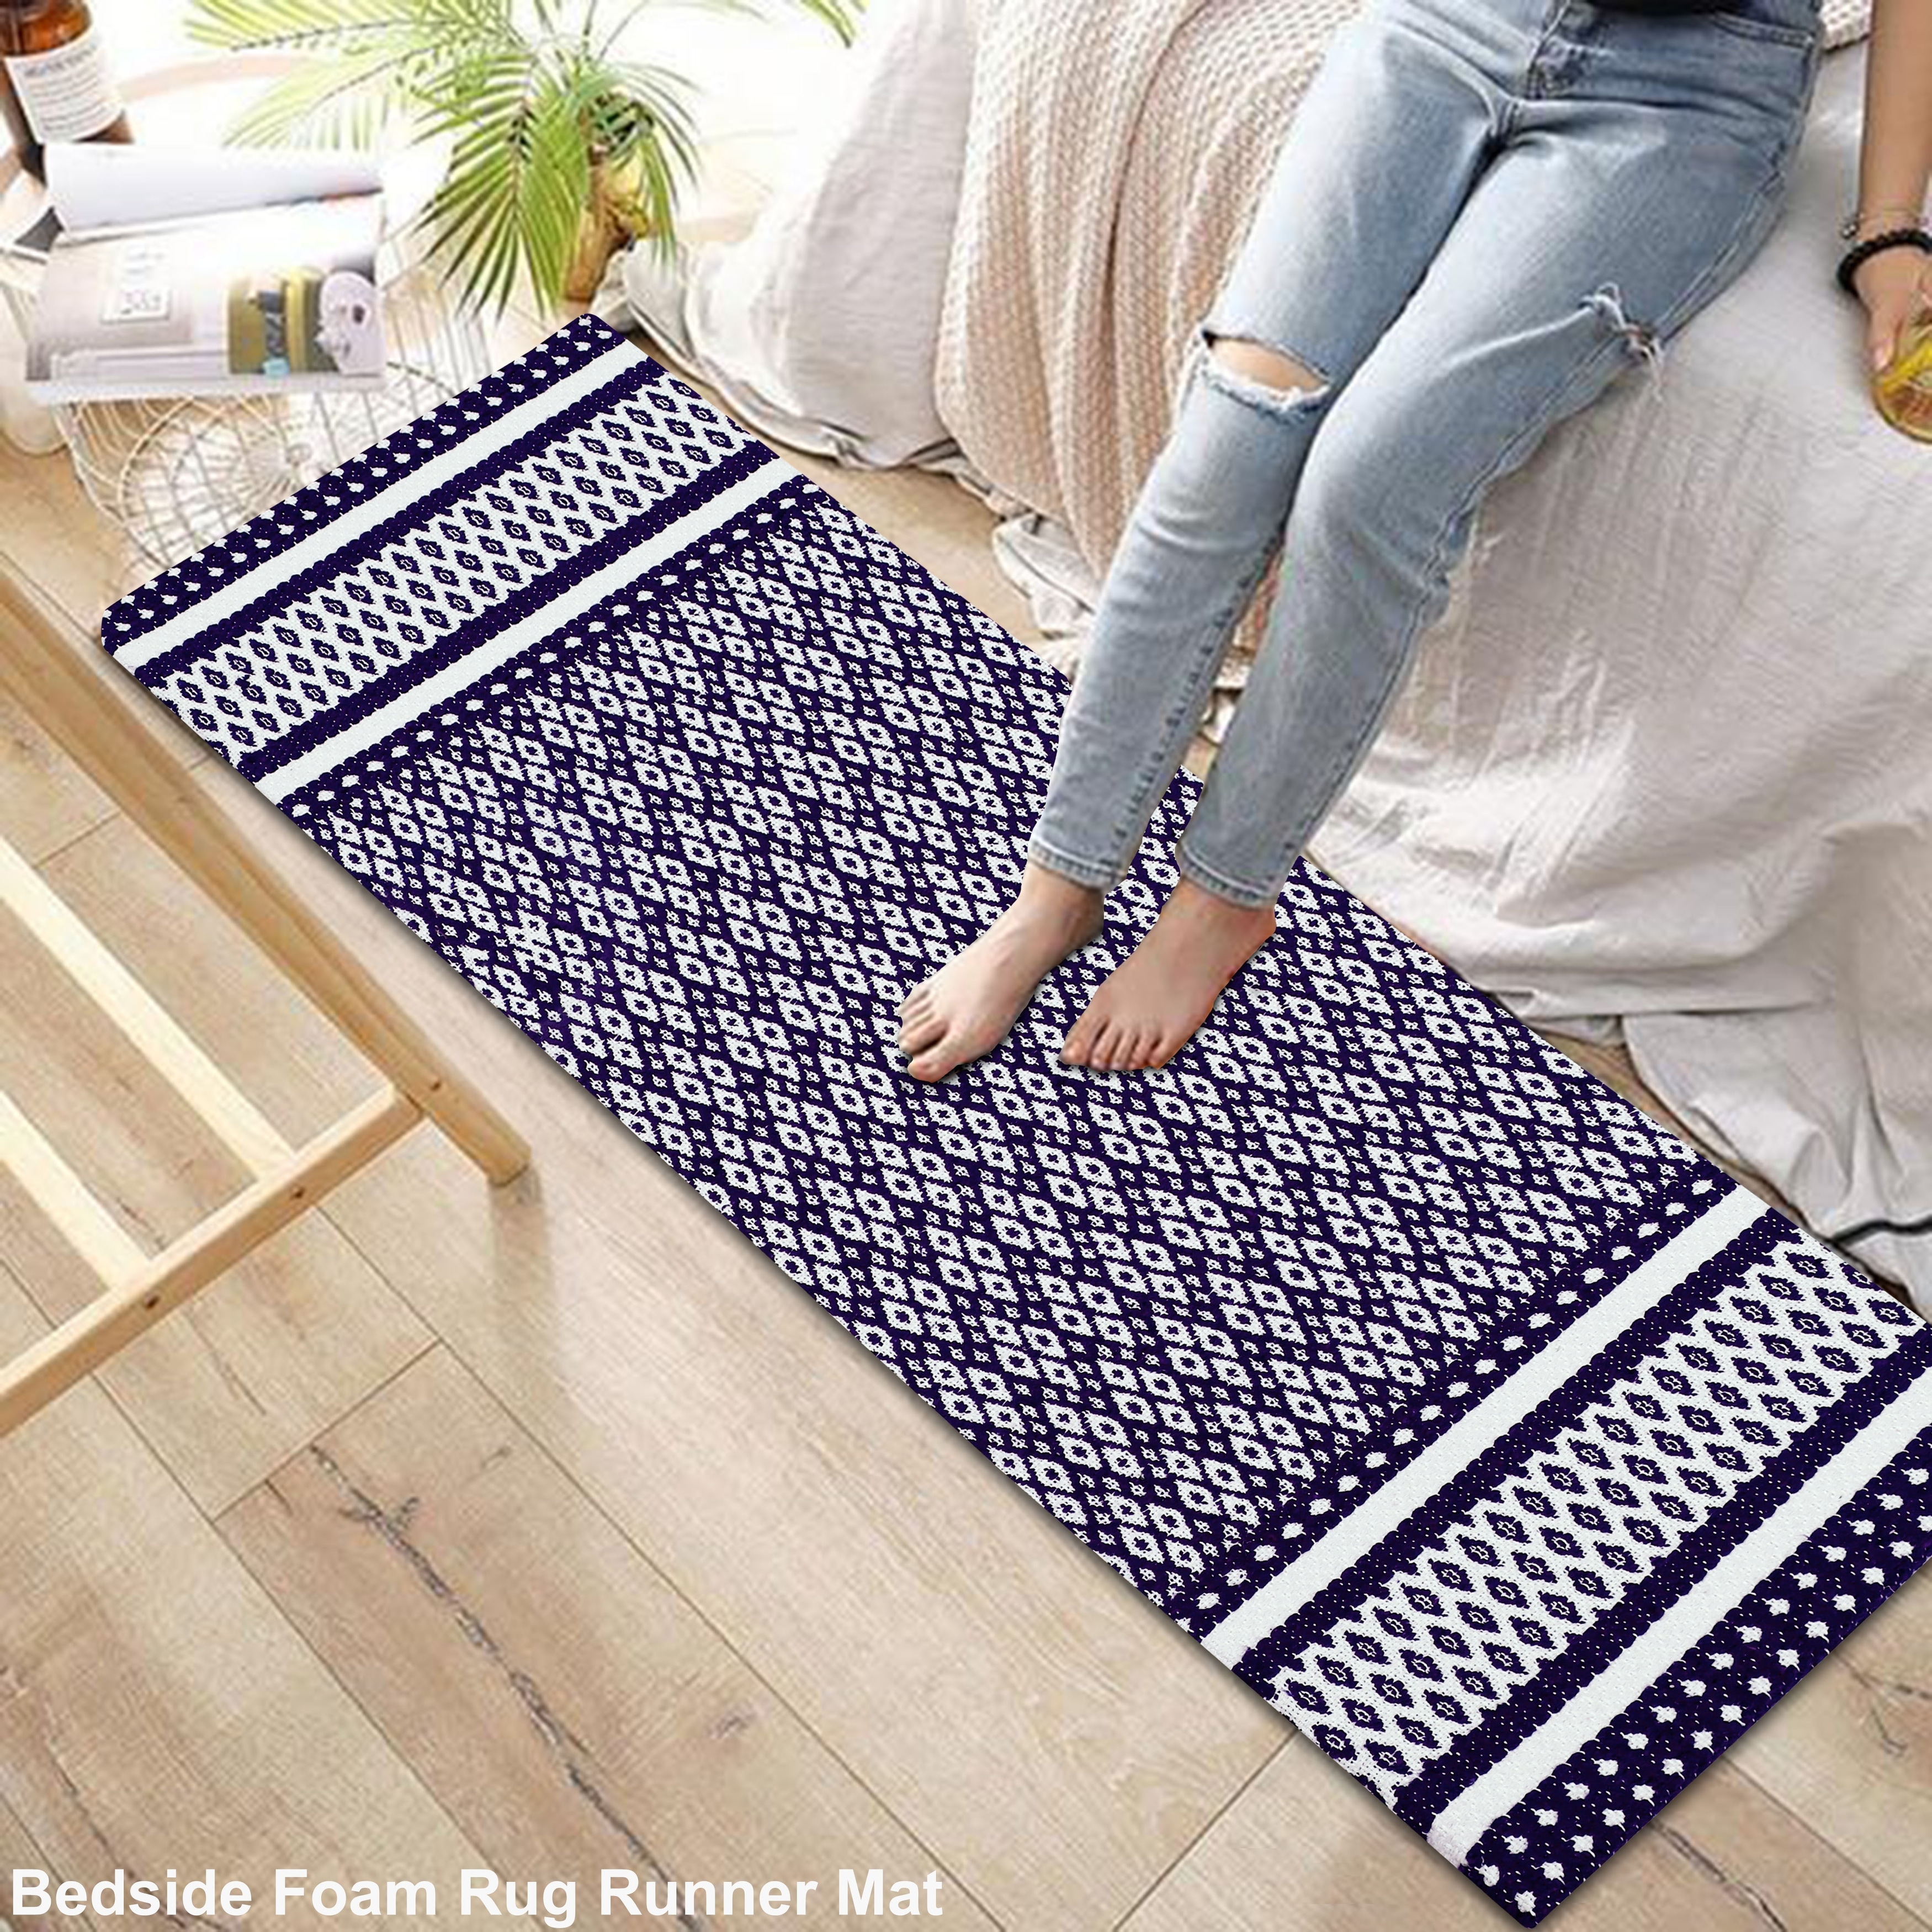 https://ak1.ostkcdn.com/images/products/is/images/direct/1ed6b97b4a80535537061a851578fc8546f46f73/Kitchen-Runner-Rug--Mat-Cushioned-Cotton-Hand-Woven-Anti-Fatigue-Mat-Kitchen-Bathroom-Bed-side-18x48%27%27.jpg